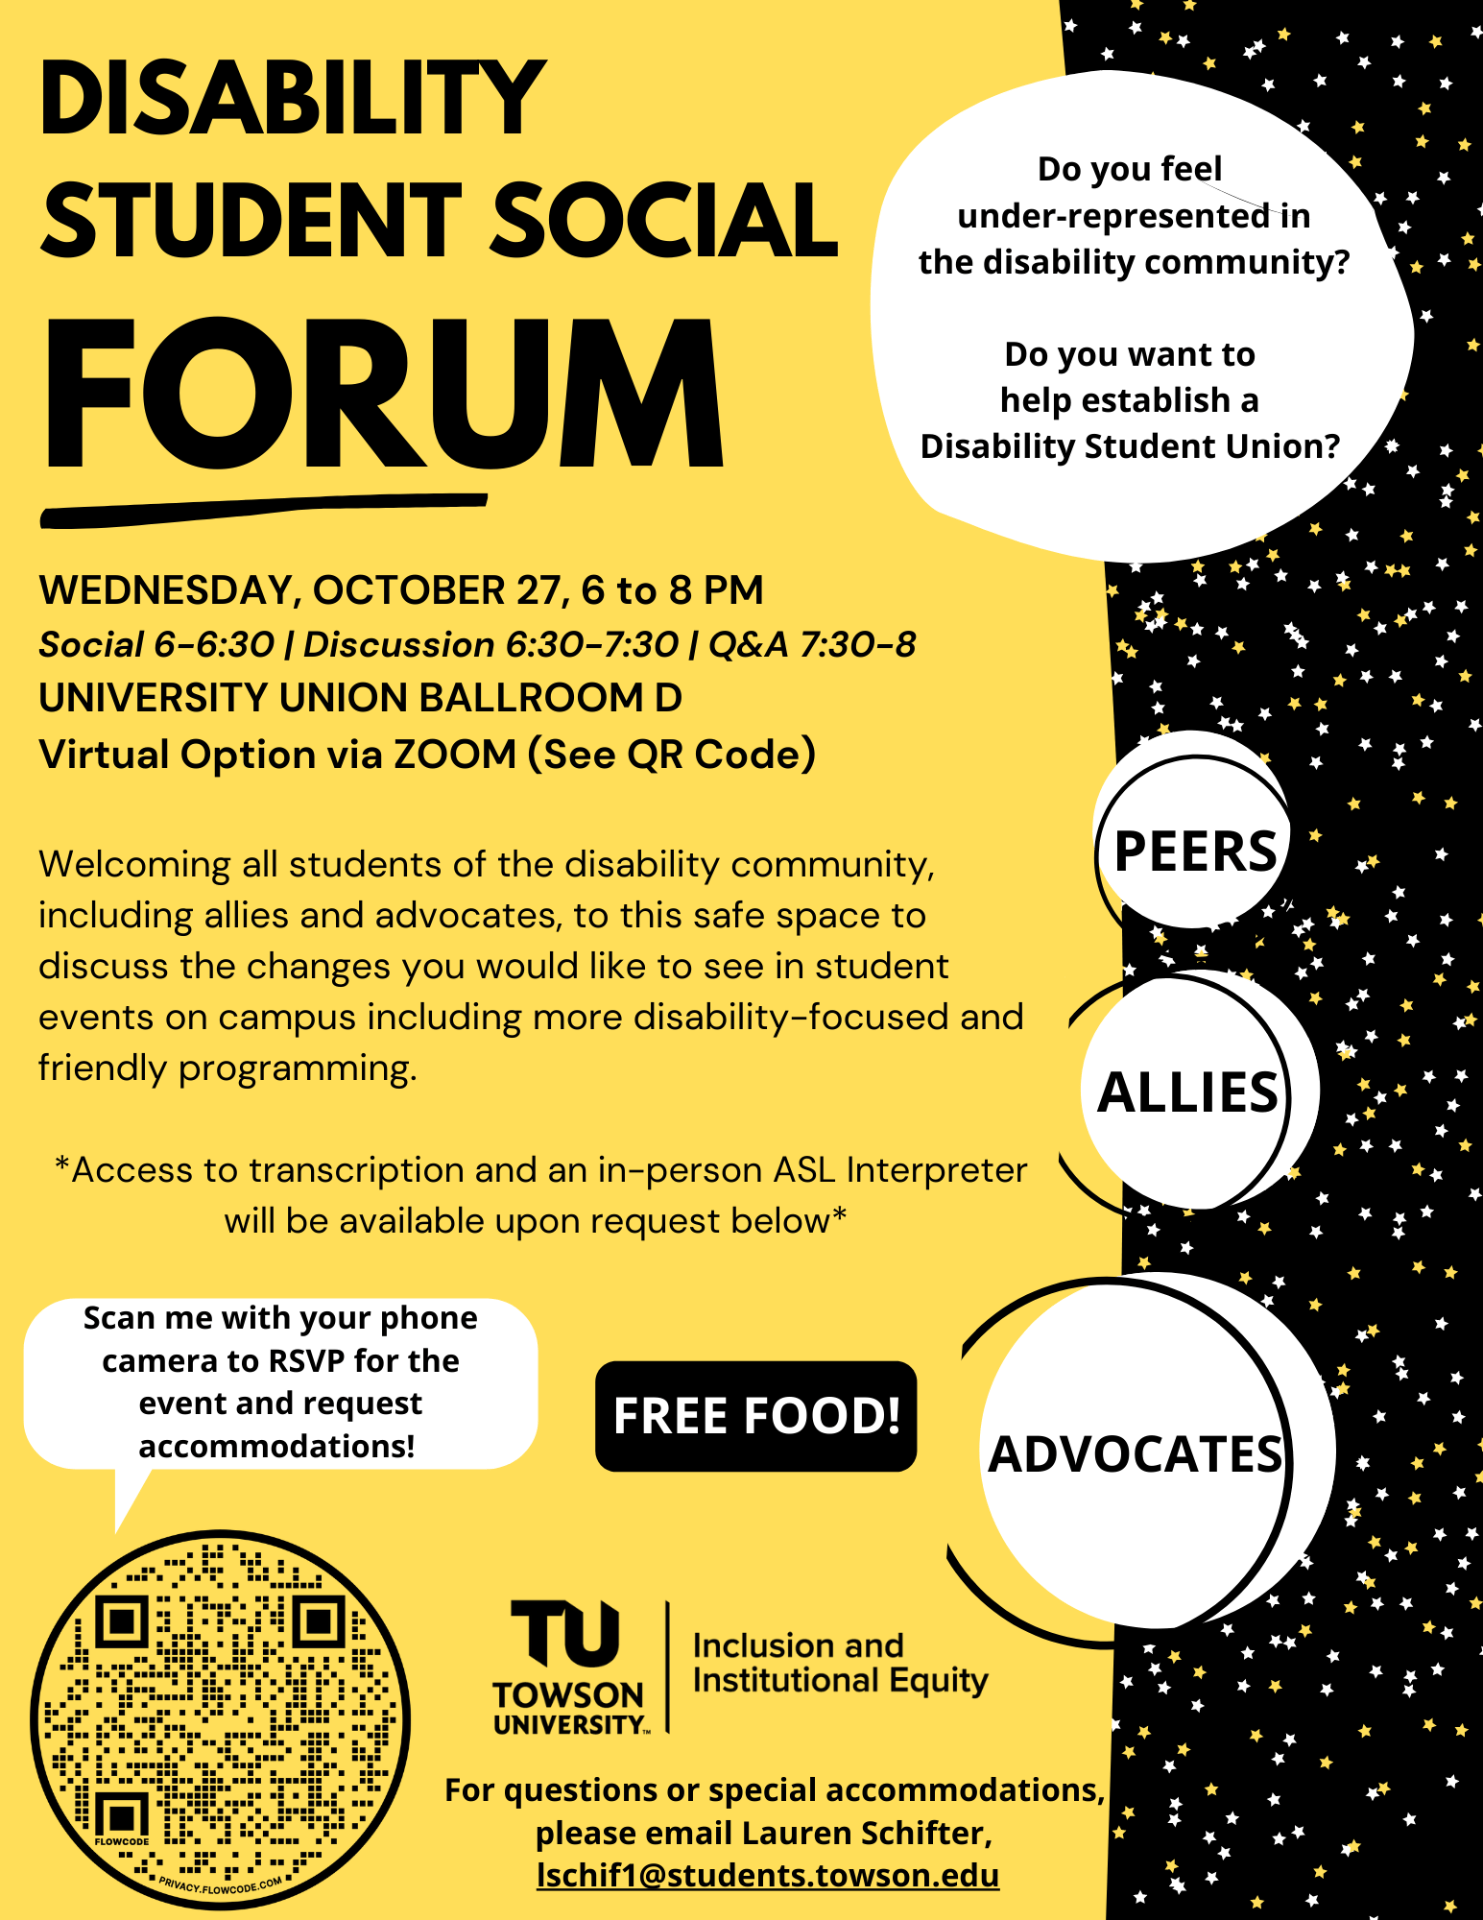 Join us for the Disability Student Social Forum on Wednesday, October 27th at 6pm in the University Union Ballroom D, to discuss changes or improvements you would like to see in student events and programming on campus. Led by students, for students, to help build a sense of community, belonging and acceptance in hopes of establishing a Disability Student Union. 